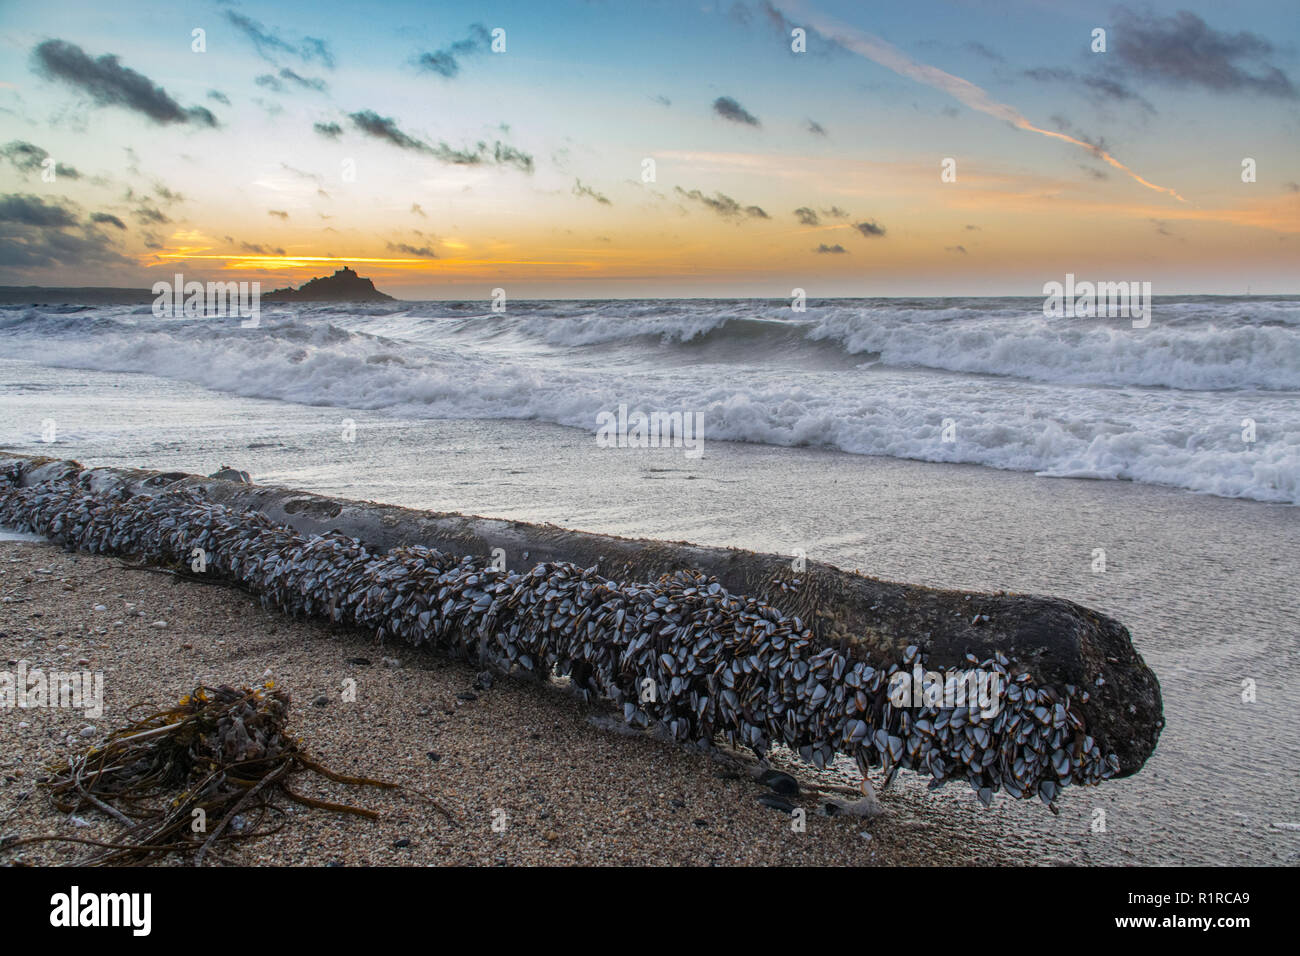 Hundreds of goose barnacles attached to a wooden pole washed up on a beach in cornwall Stock Photo